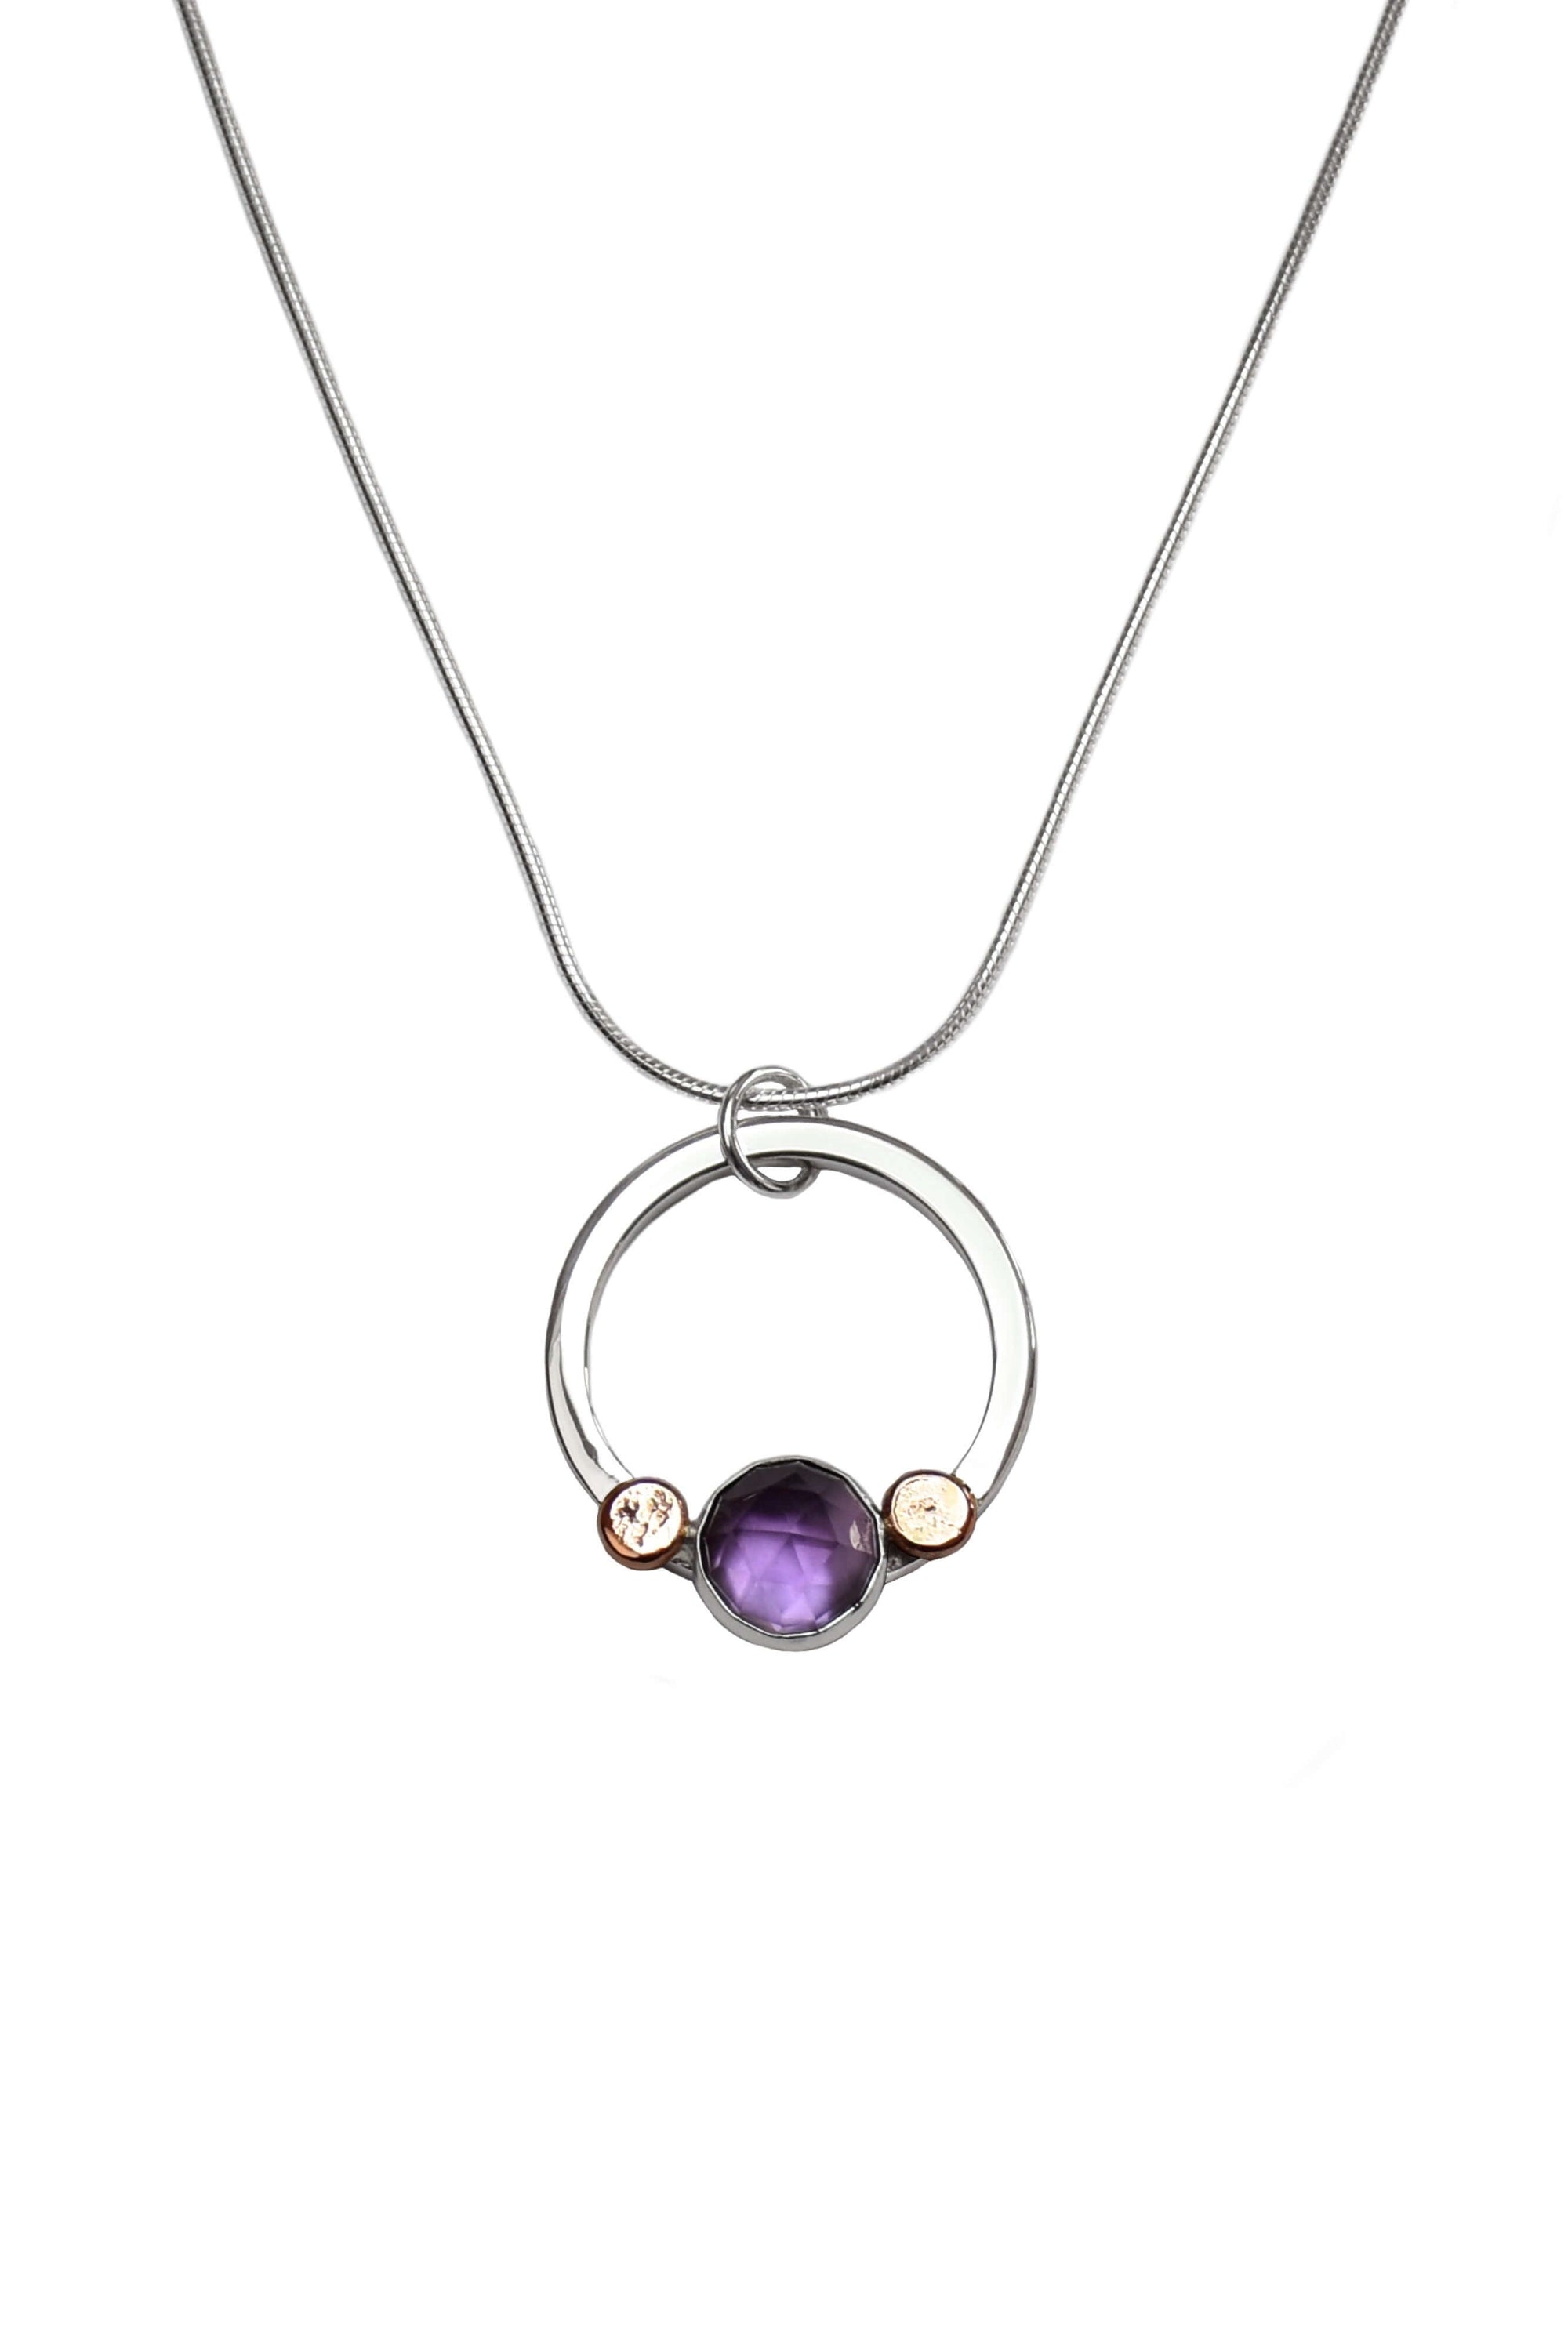 a sterling silver and amethyst necklace with rose gold pebble details